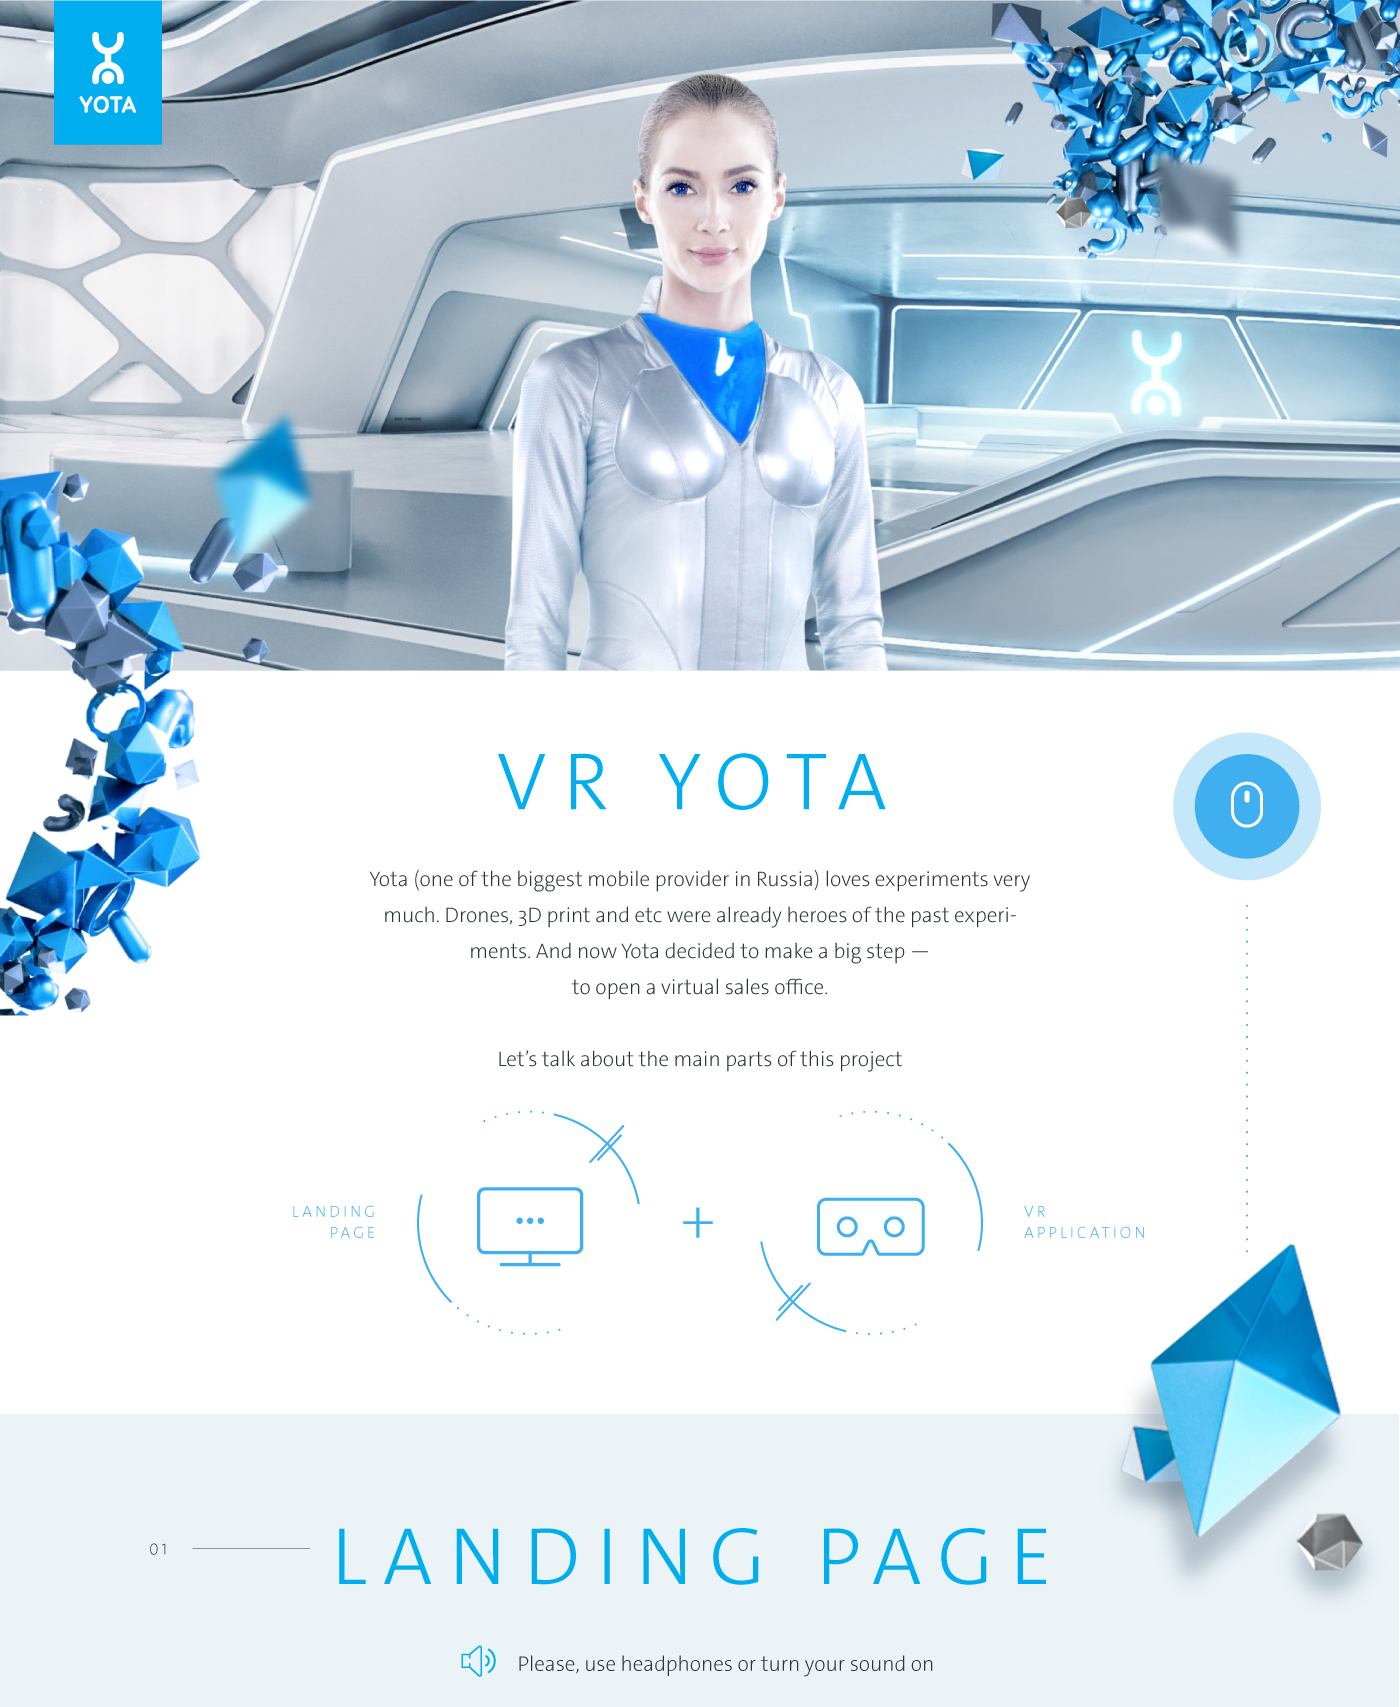 vr Virtual reality Mobile app landing page Yota future office interactions